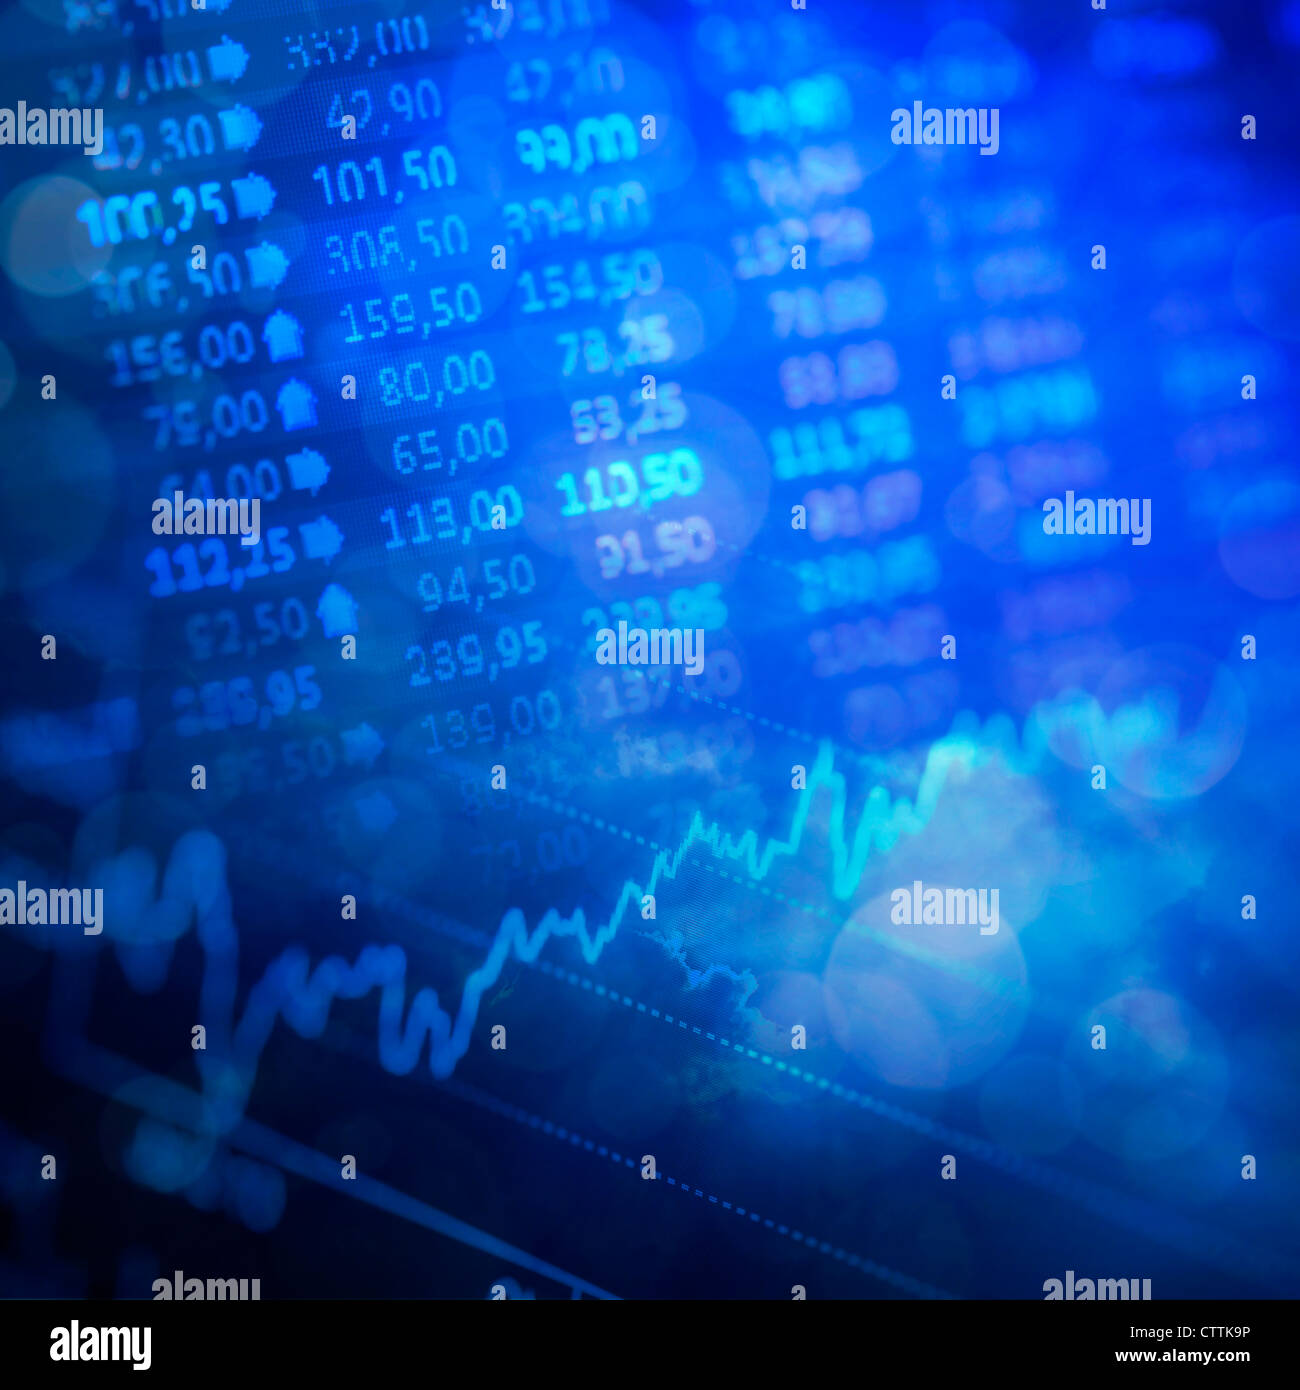 Abstract background - stock exchange graph background. Stock Photo